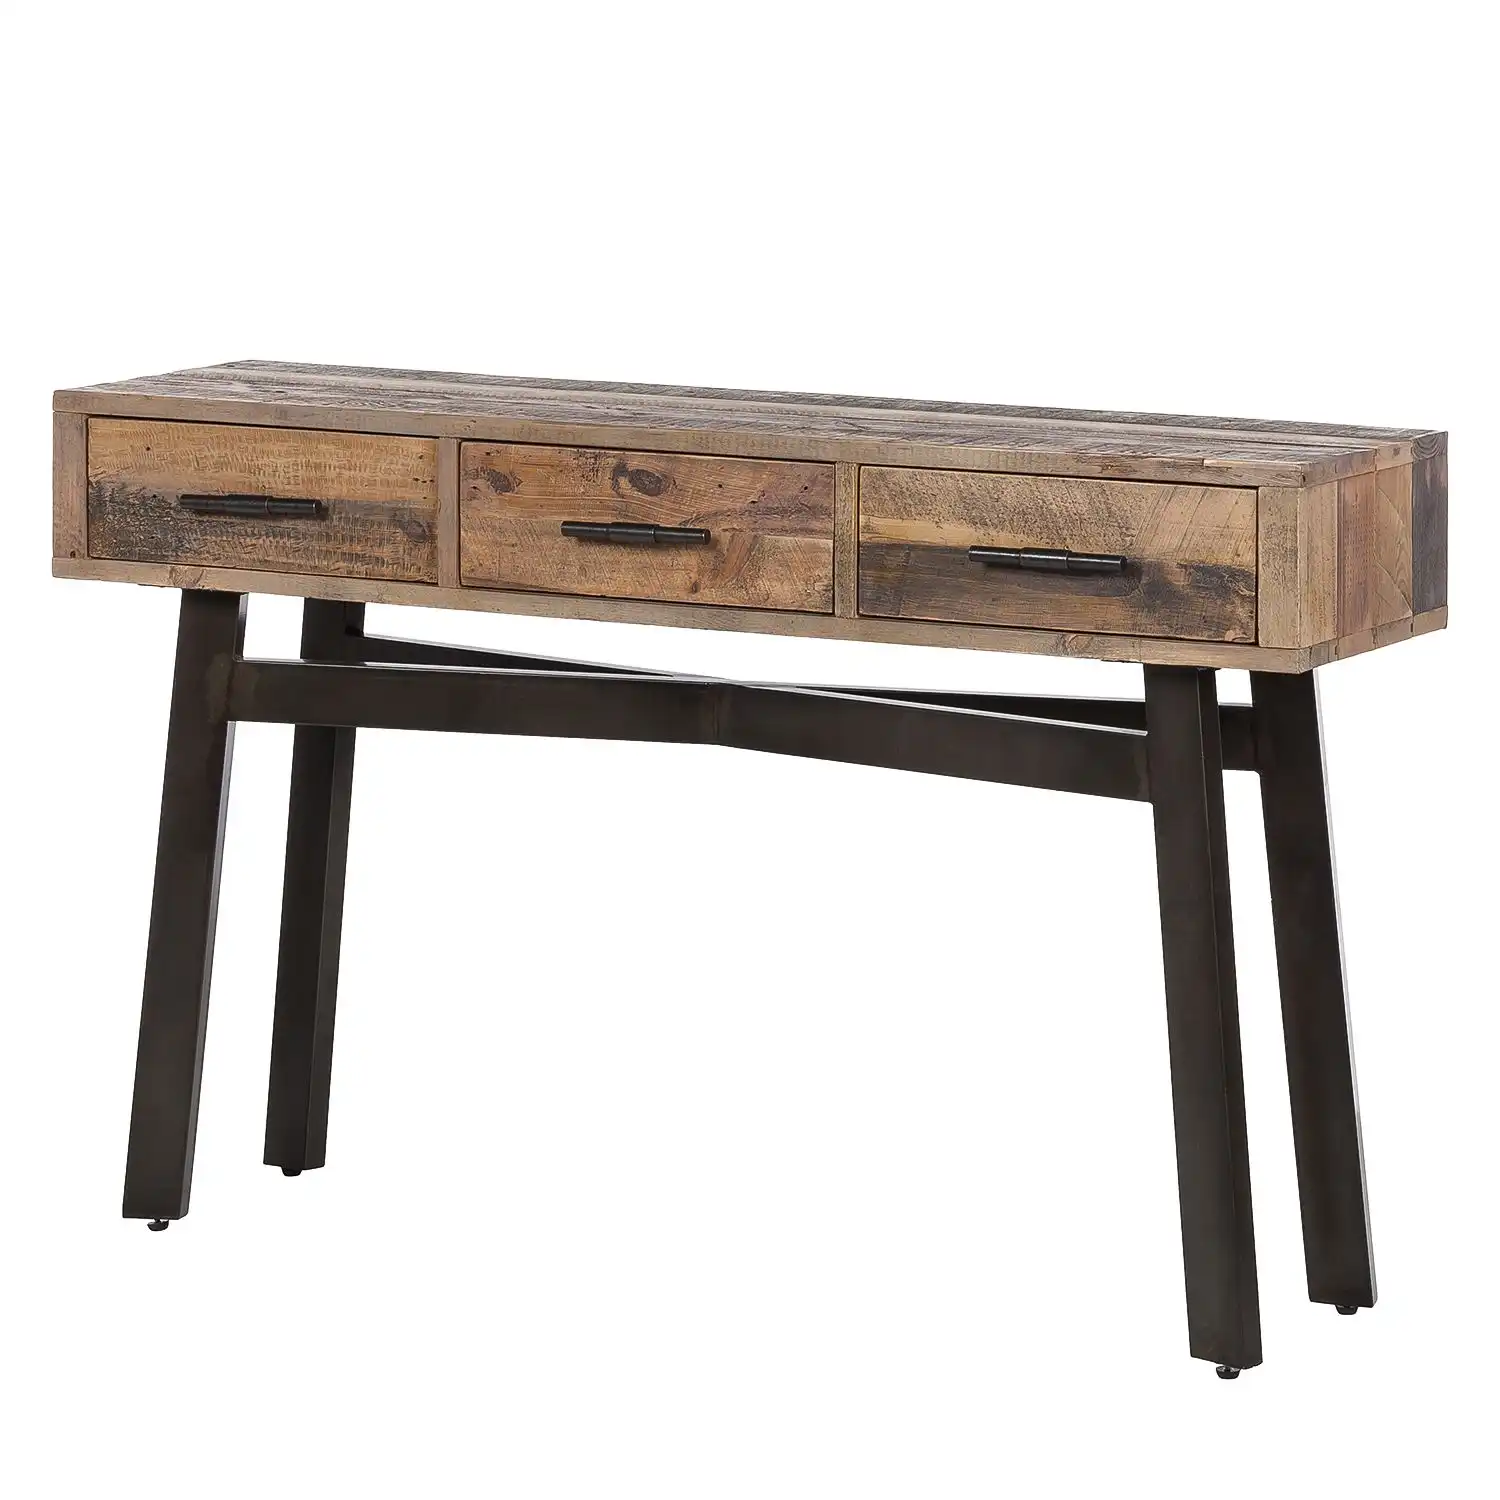 Reclaimed Wood Console Table with 3 drawers
(KD) - popular handicrafts